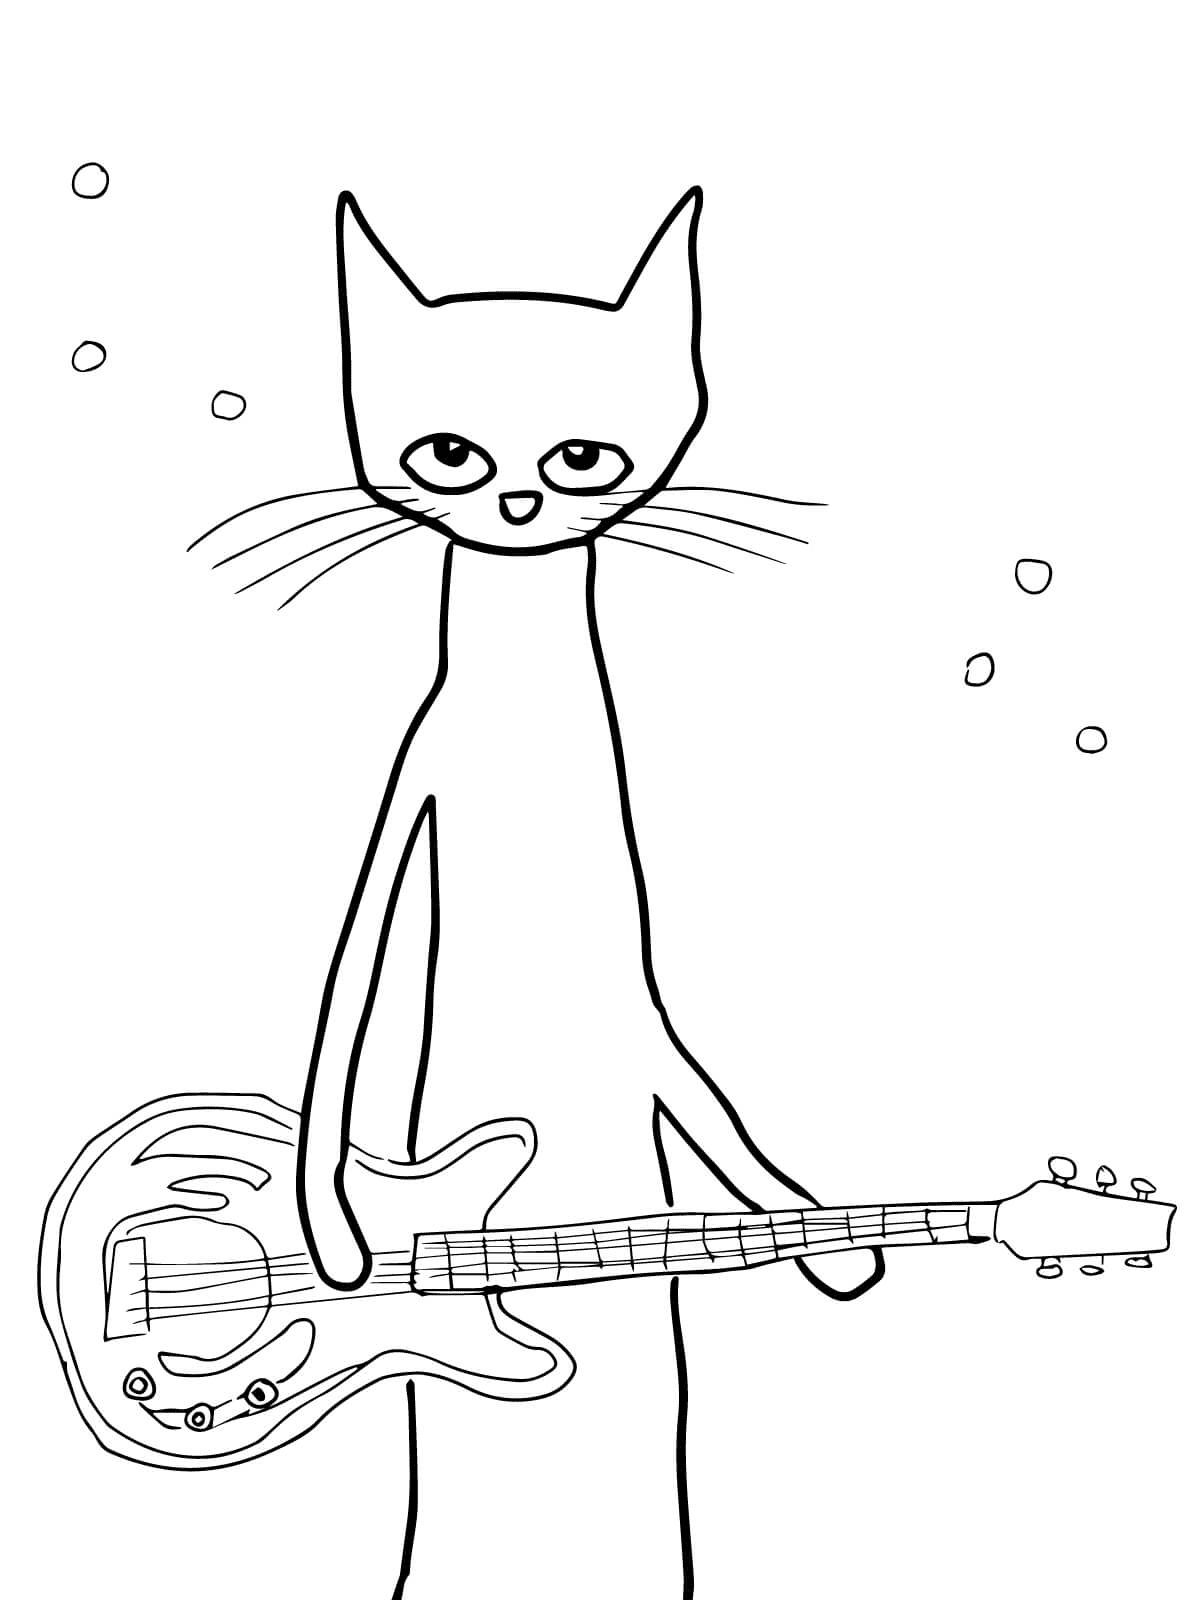 Guitarist Pete the Cat Coloring Pages